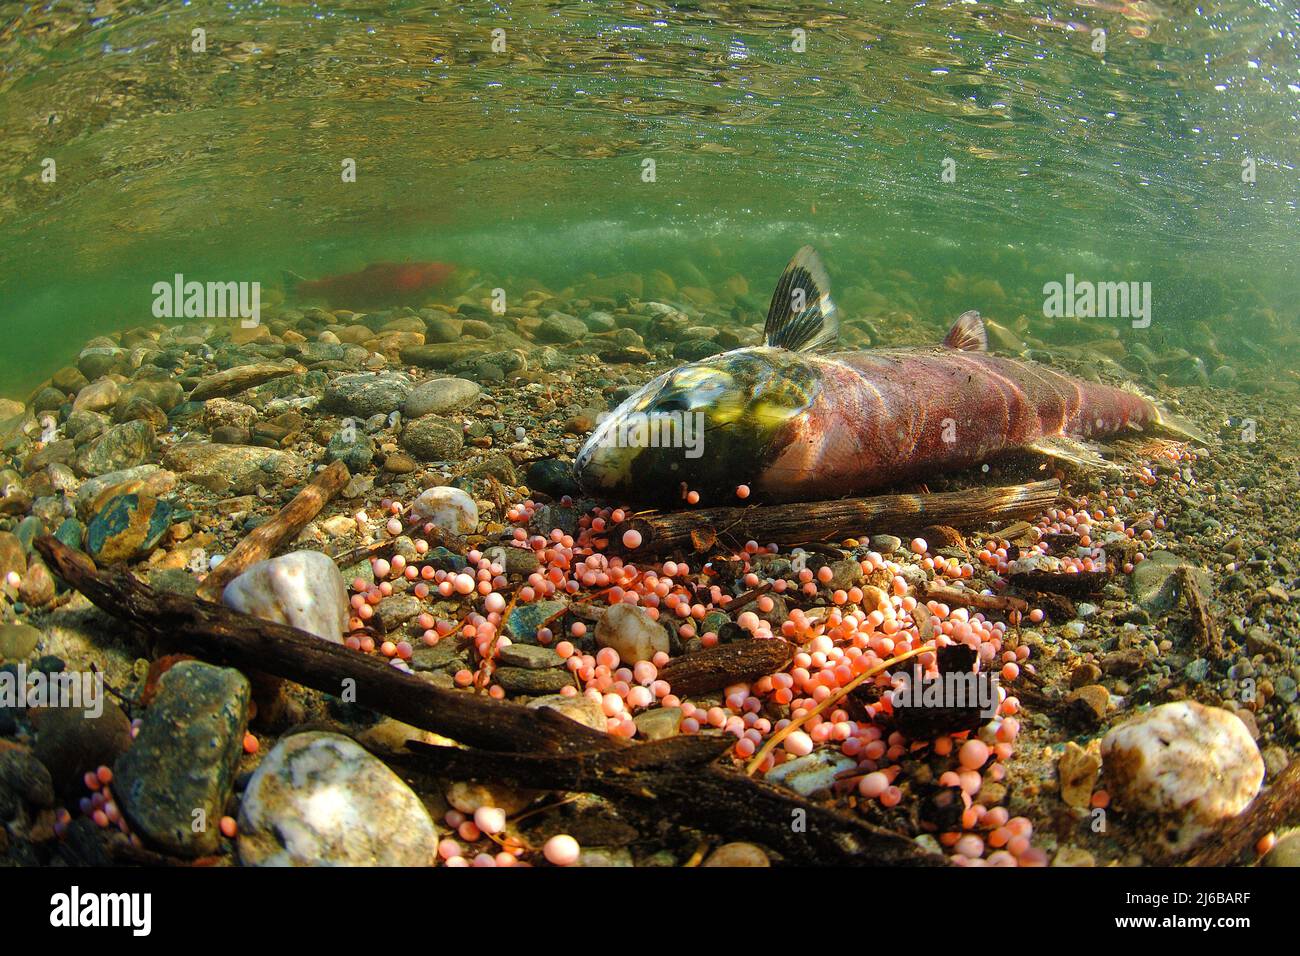 Dead Sockeye Salmon (Oncorhynchus nerka),at Adams River, died after spawn, Roderick Haig-Brown Provincial Park, British Columbia, Canada Stock Photo